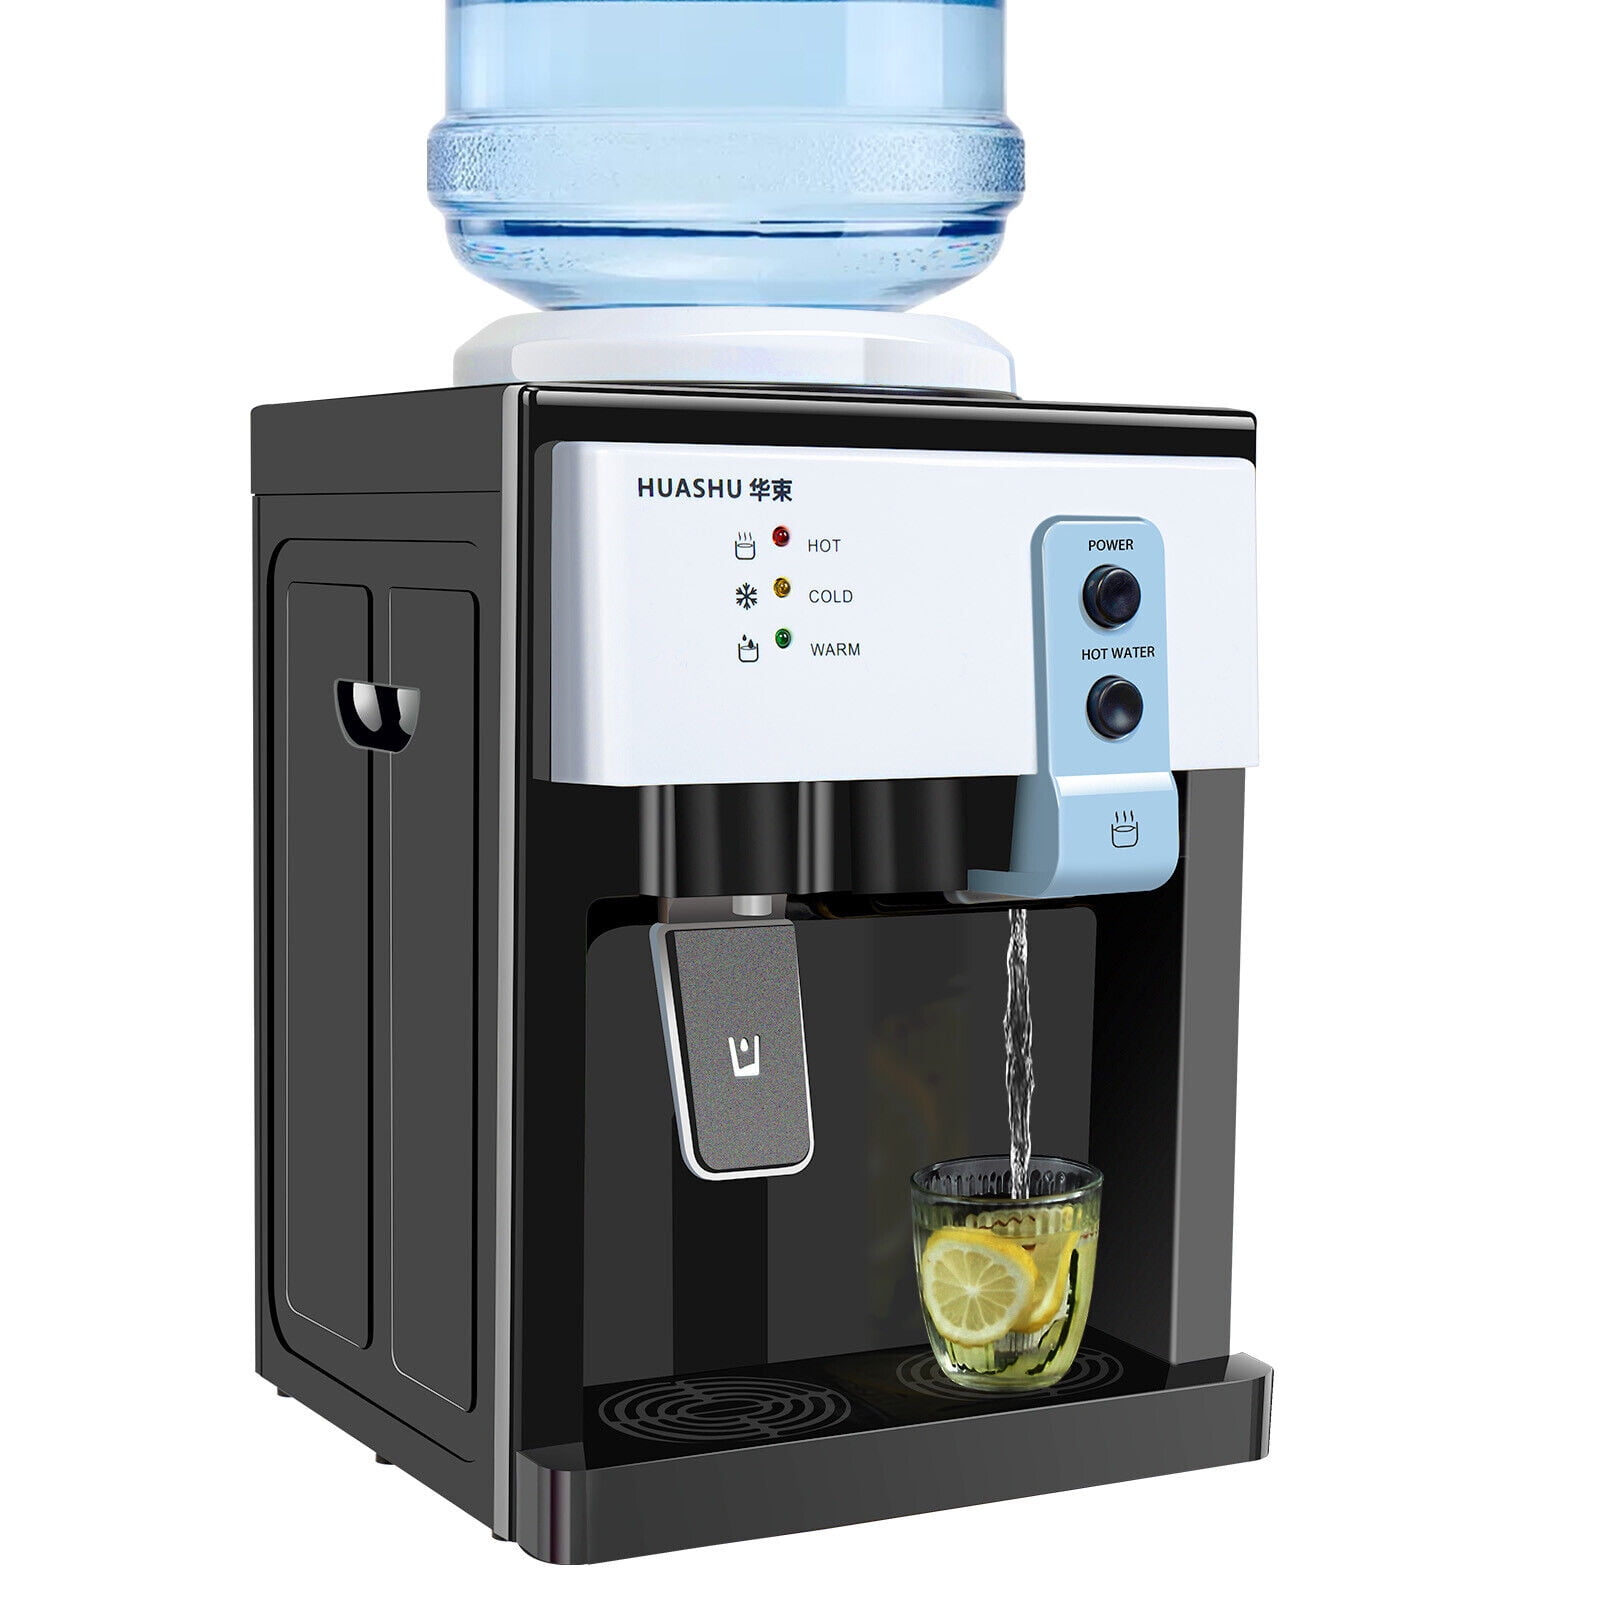 SHIOUCY Electric_Hot_Cold_Water_Dispen Top Loading Water Cooler Dispenser -  Desktop Electric Hot and Cold Water Dispenser,3 Temperature Settings - Boiling  Water, Norm